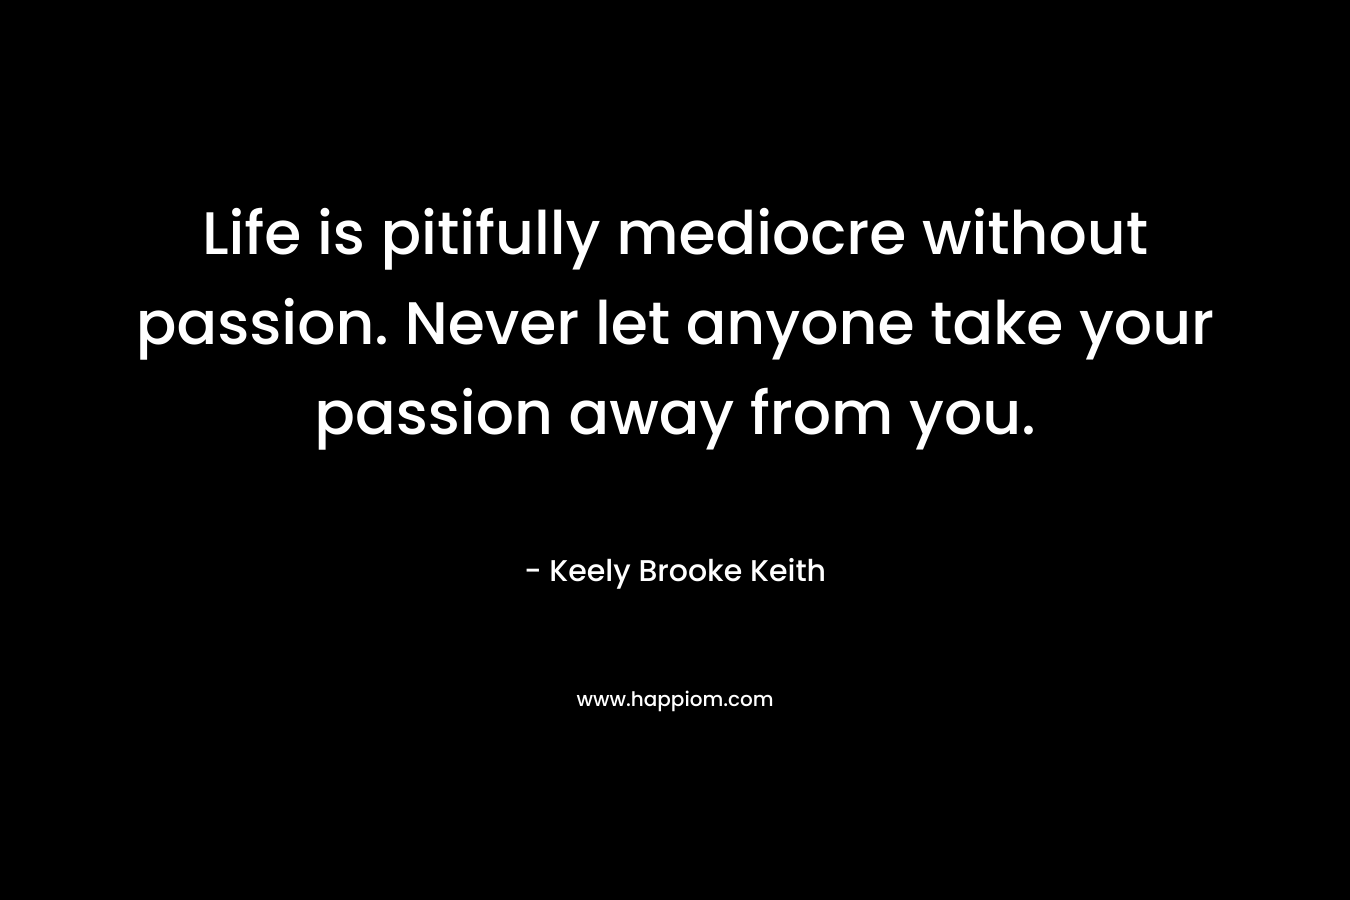 Life is pitifully mediocre without passion. Never let anyone take your passion away from you.